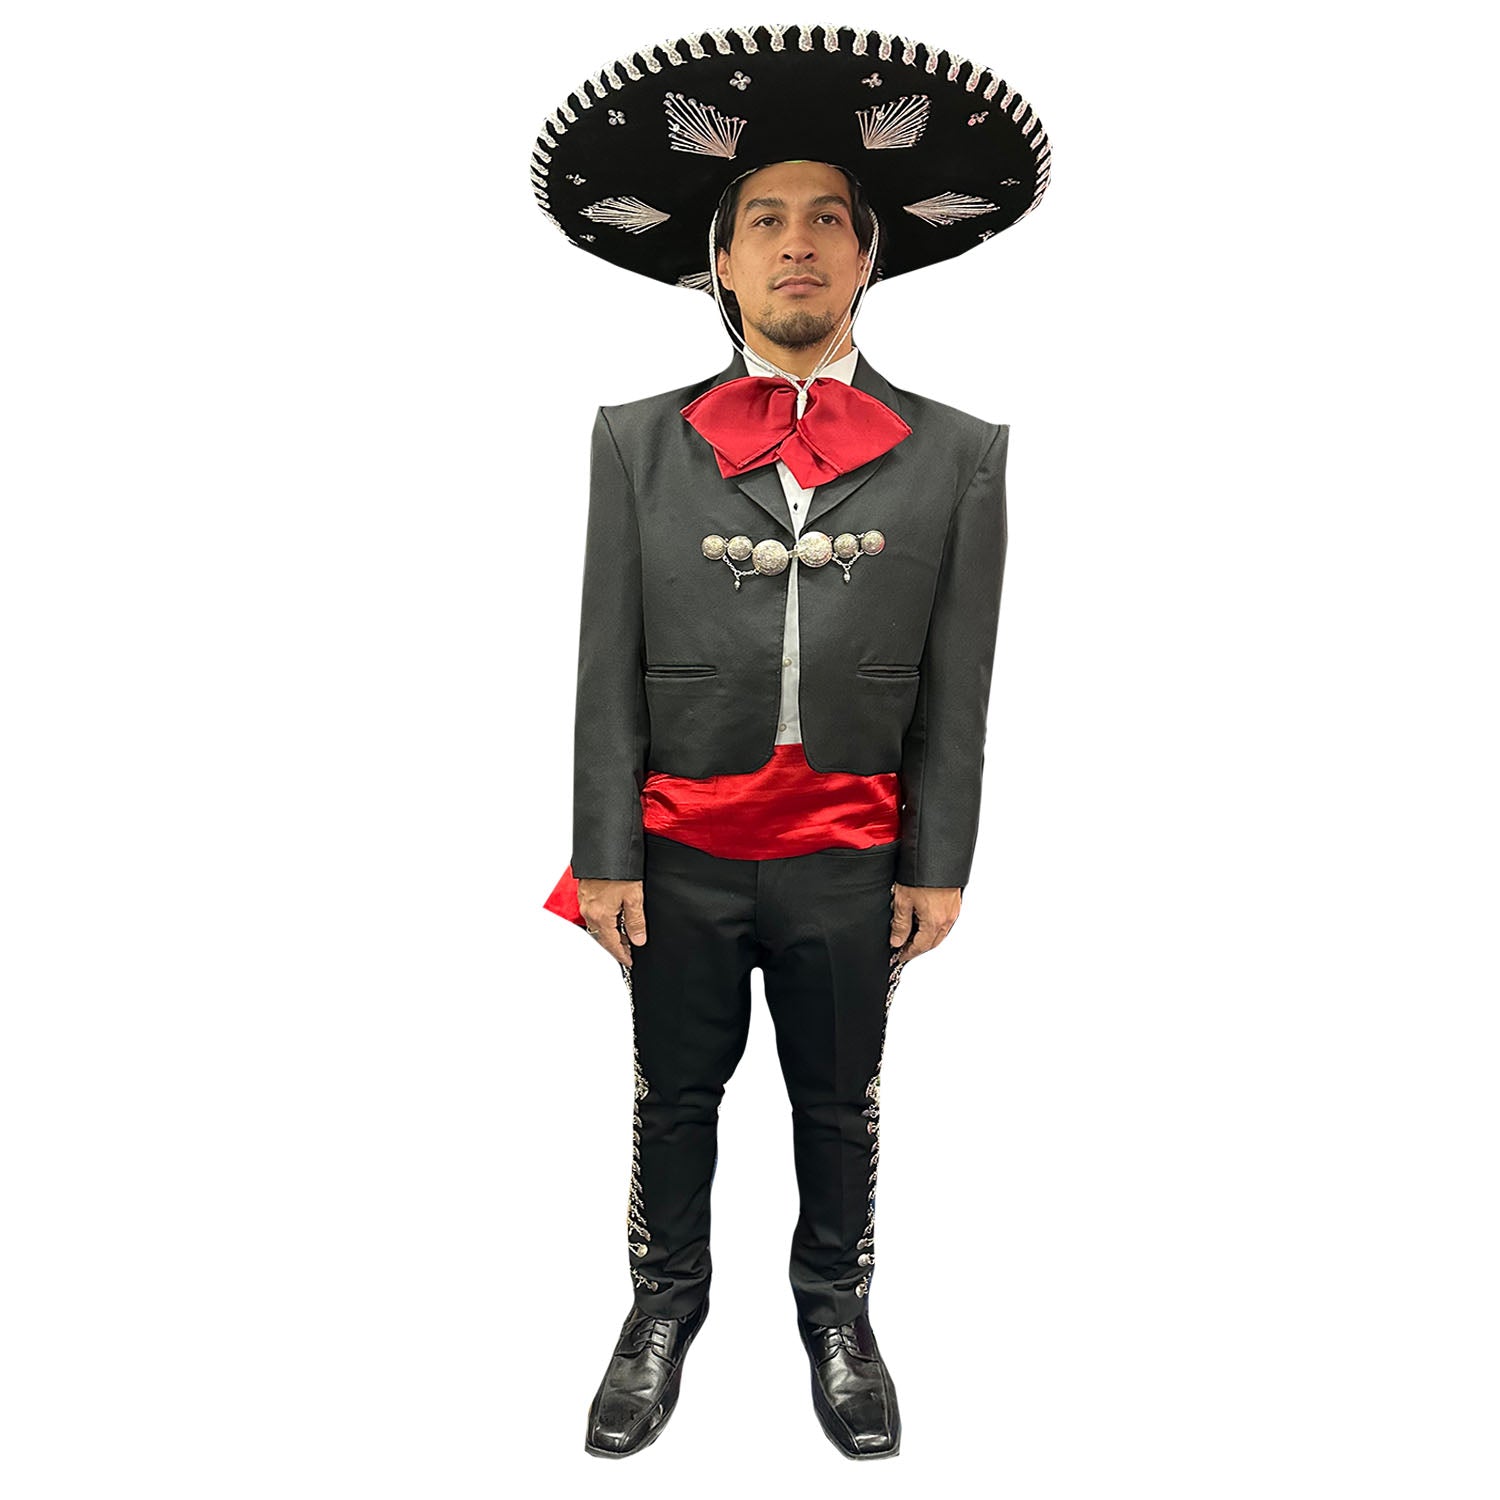 Deluxe Mariachi Black & Red Adult Costume